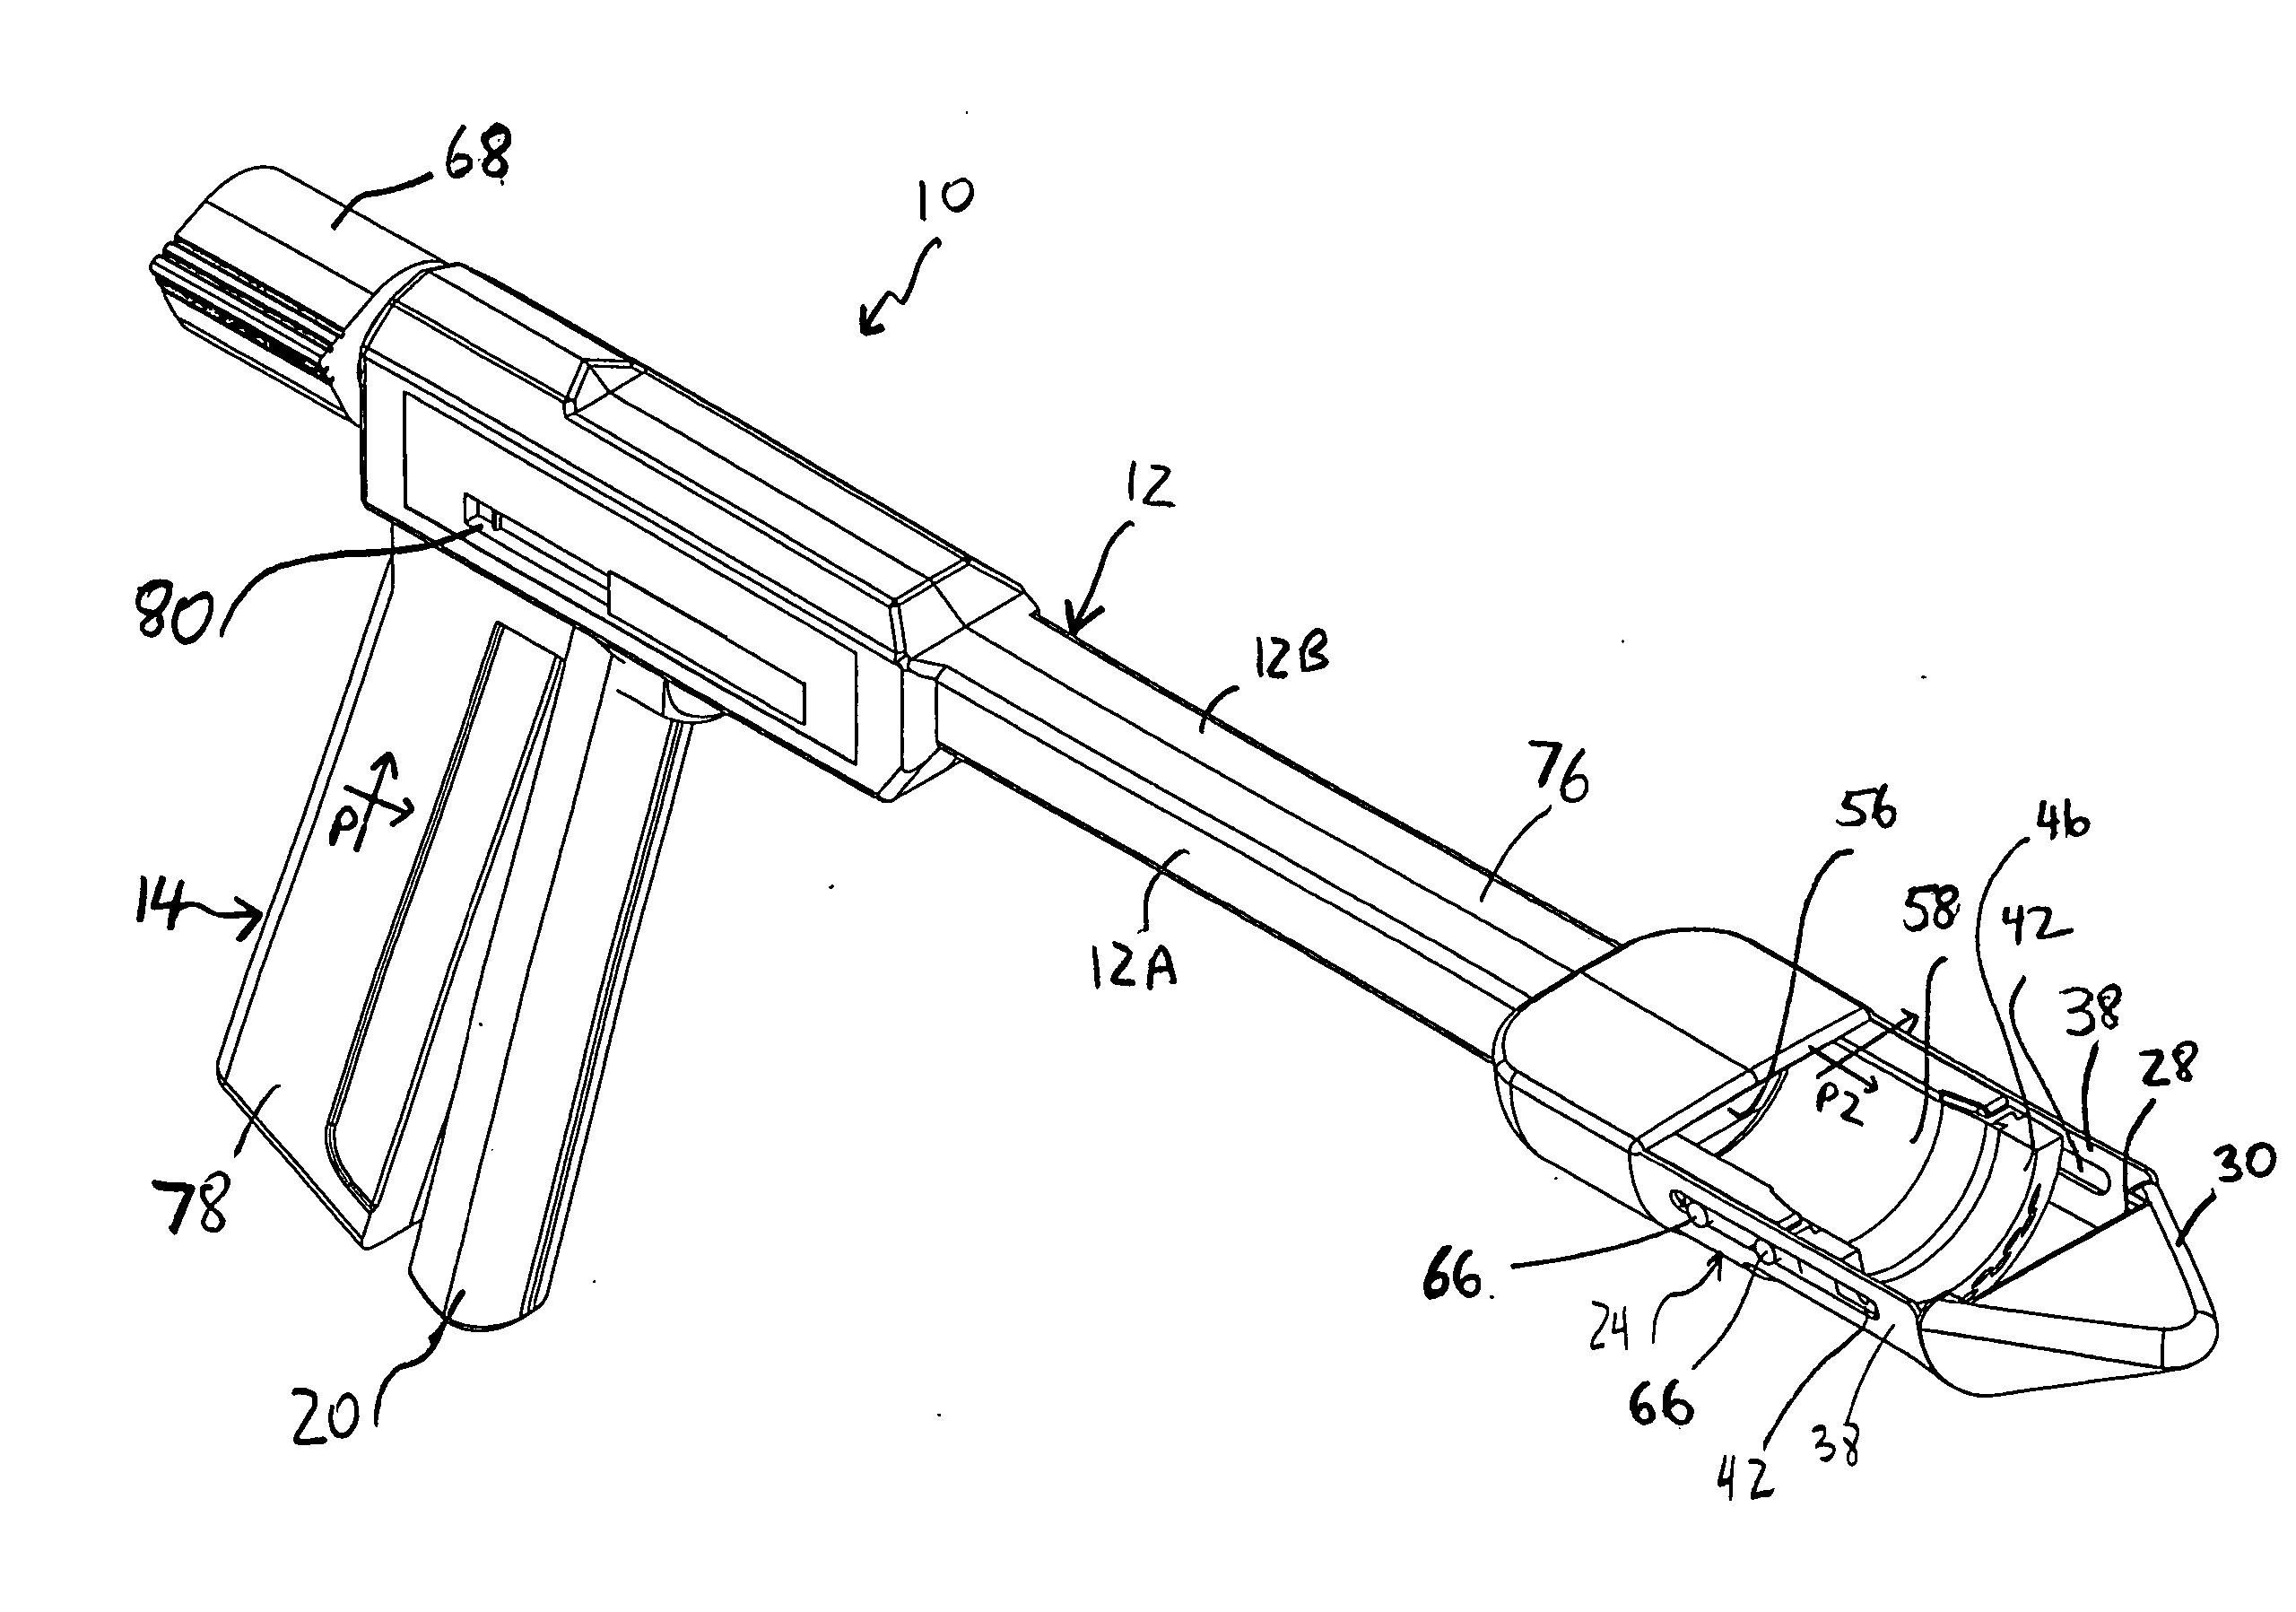 Surgical stapling instrument and method for its use